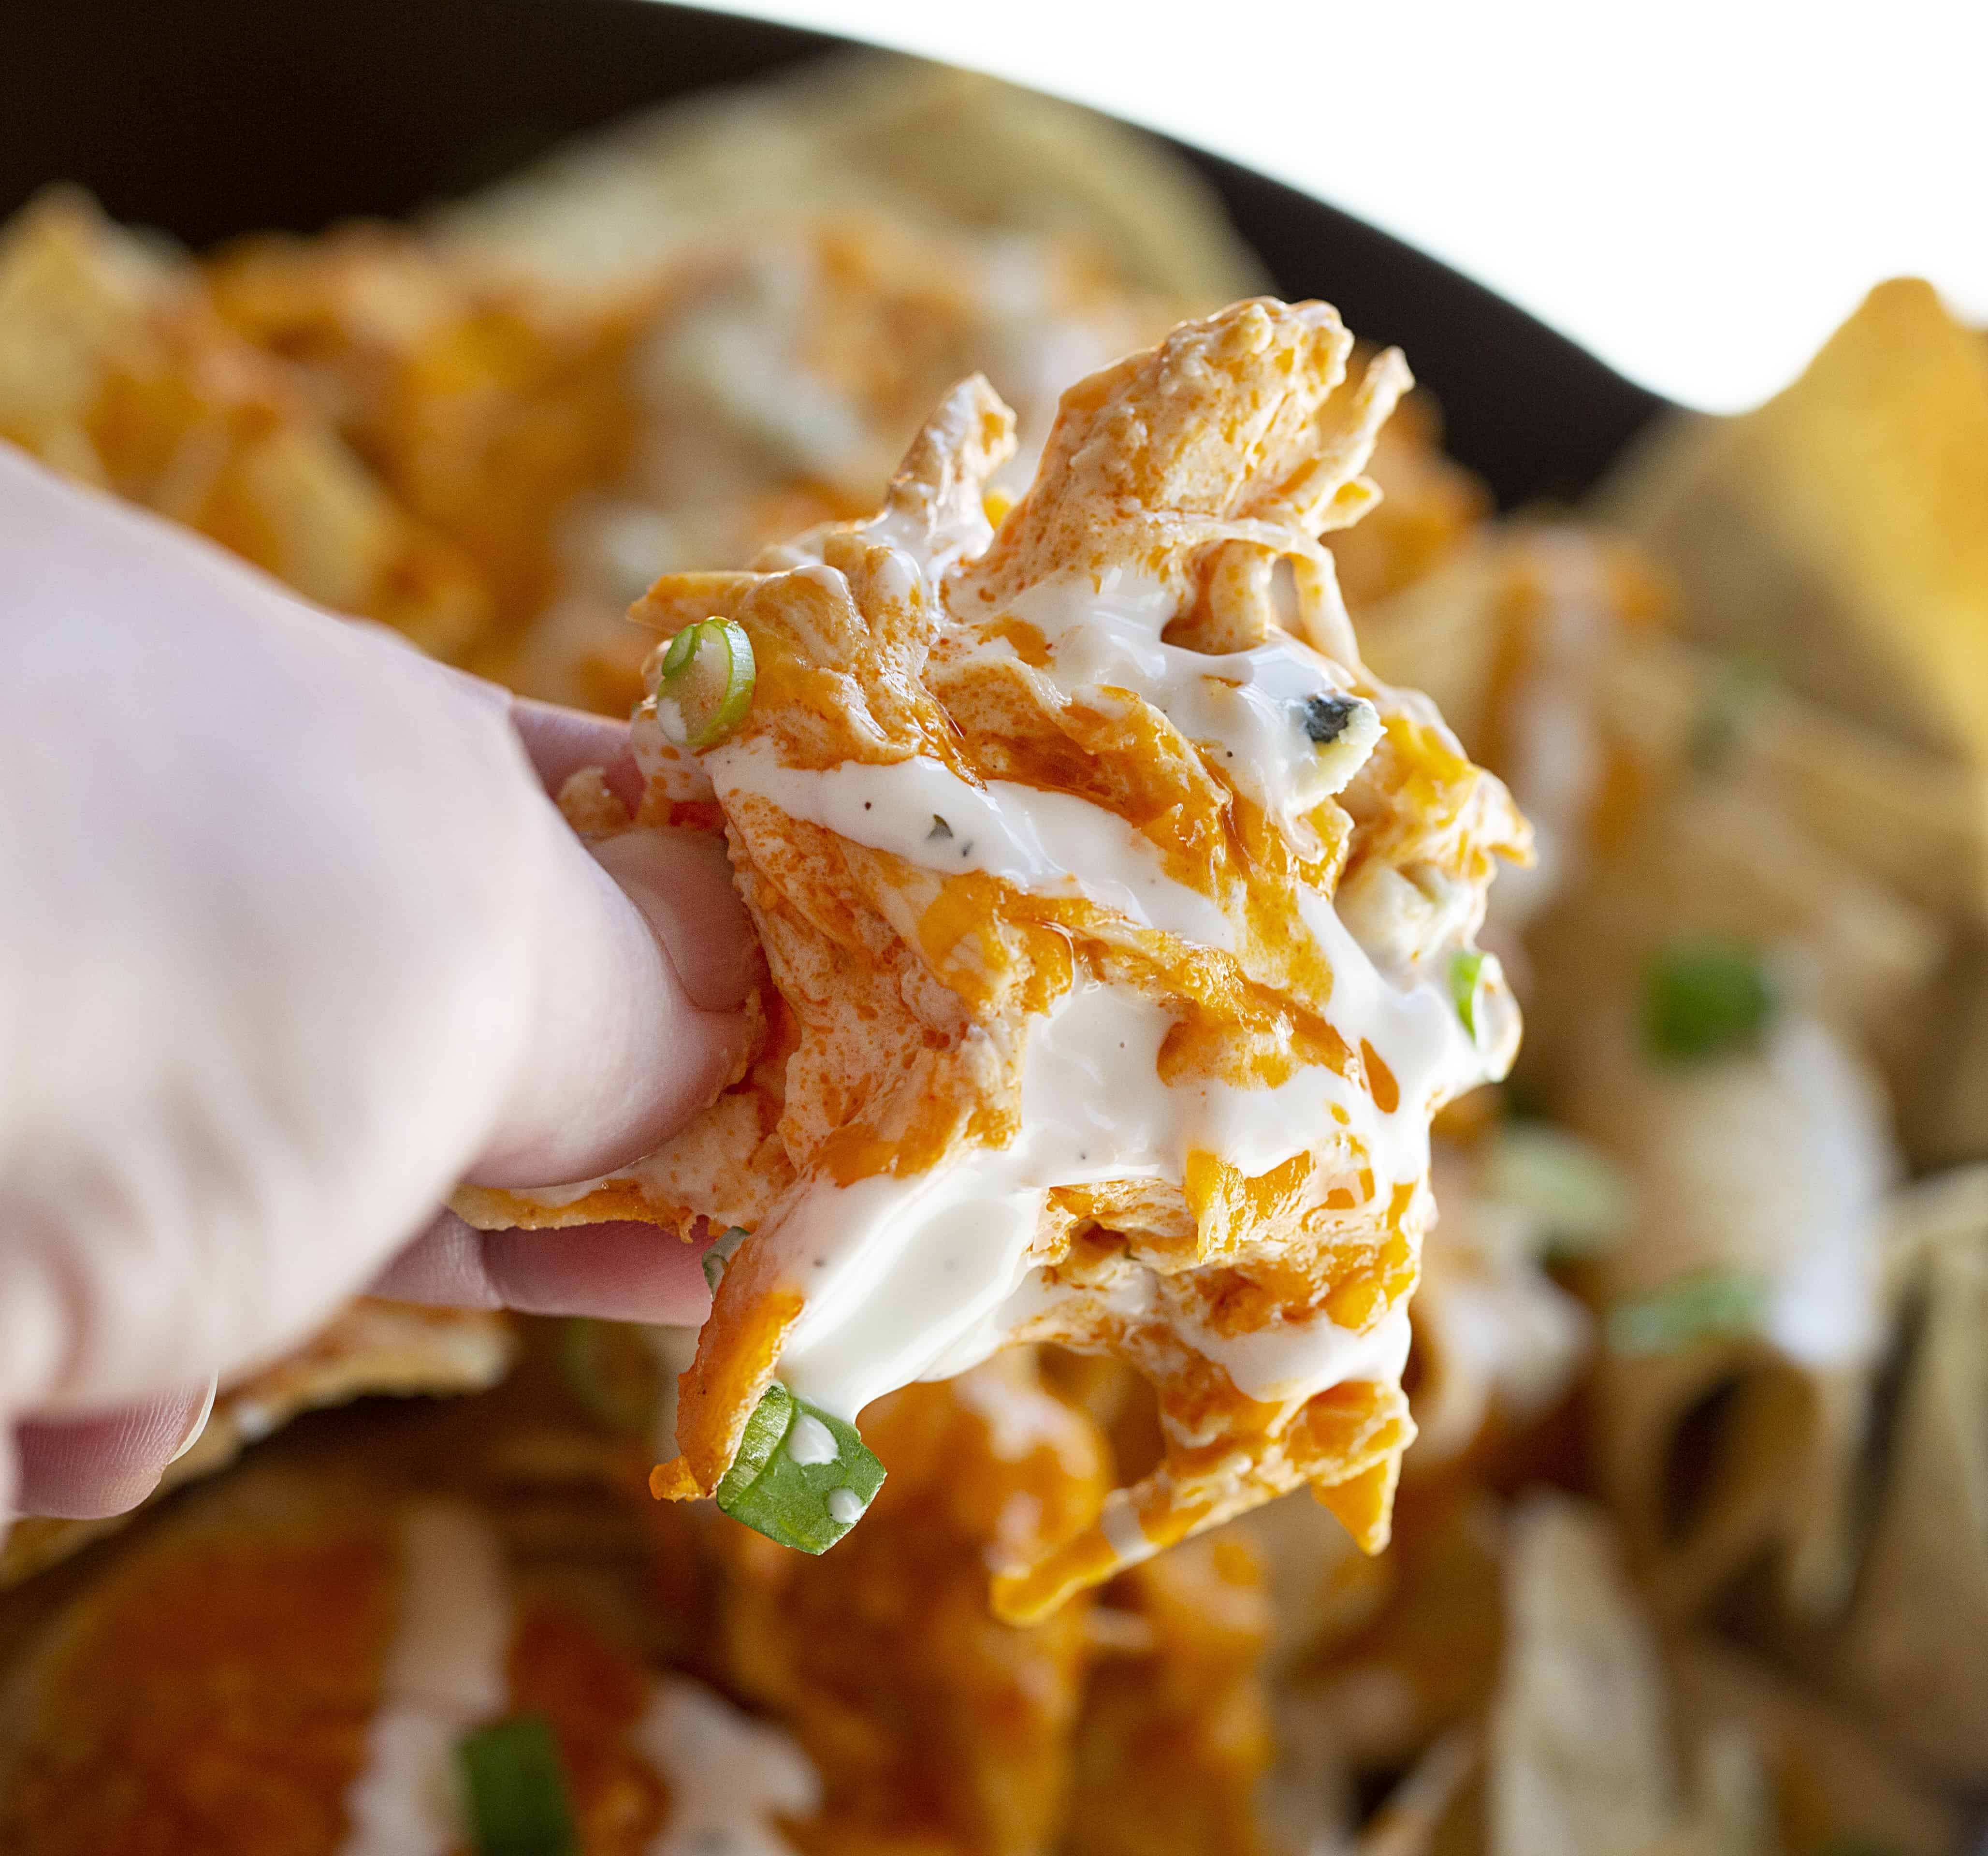 How to Make Nachos with Buffalo Chicken